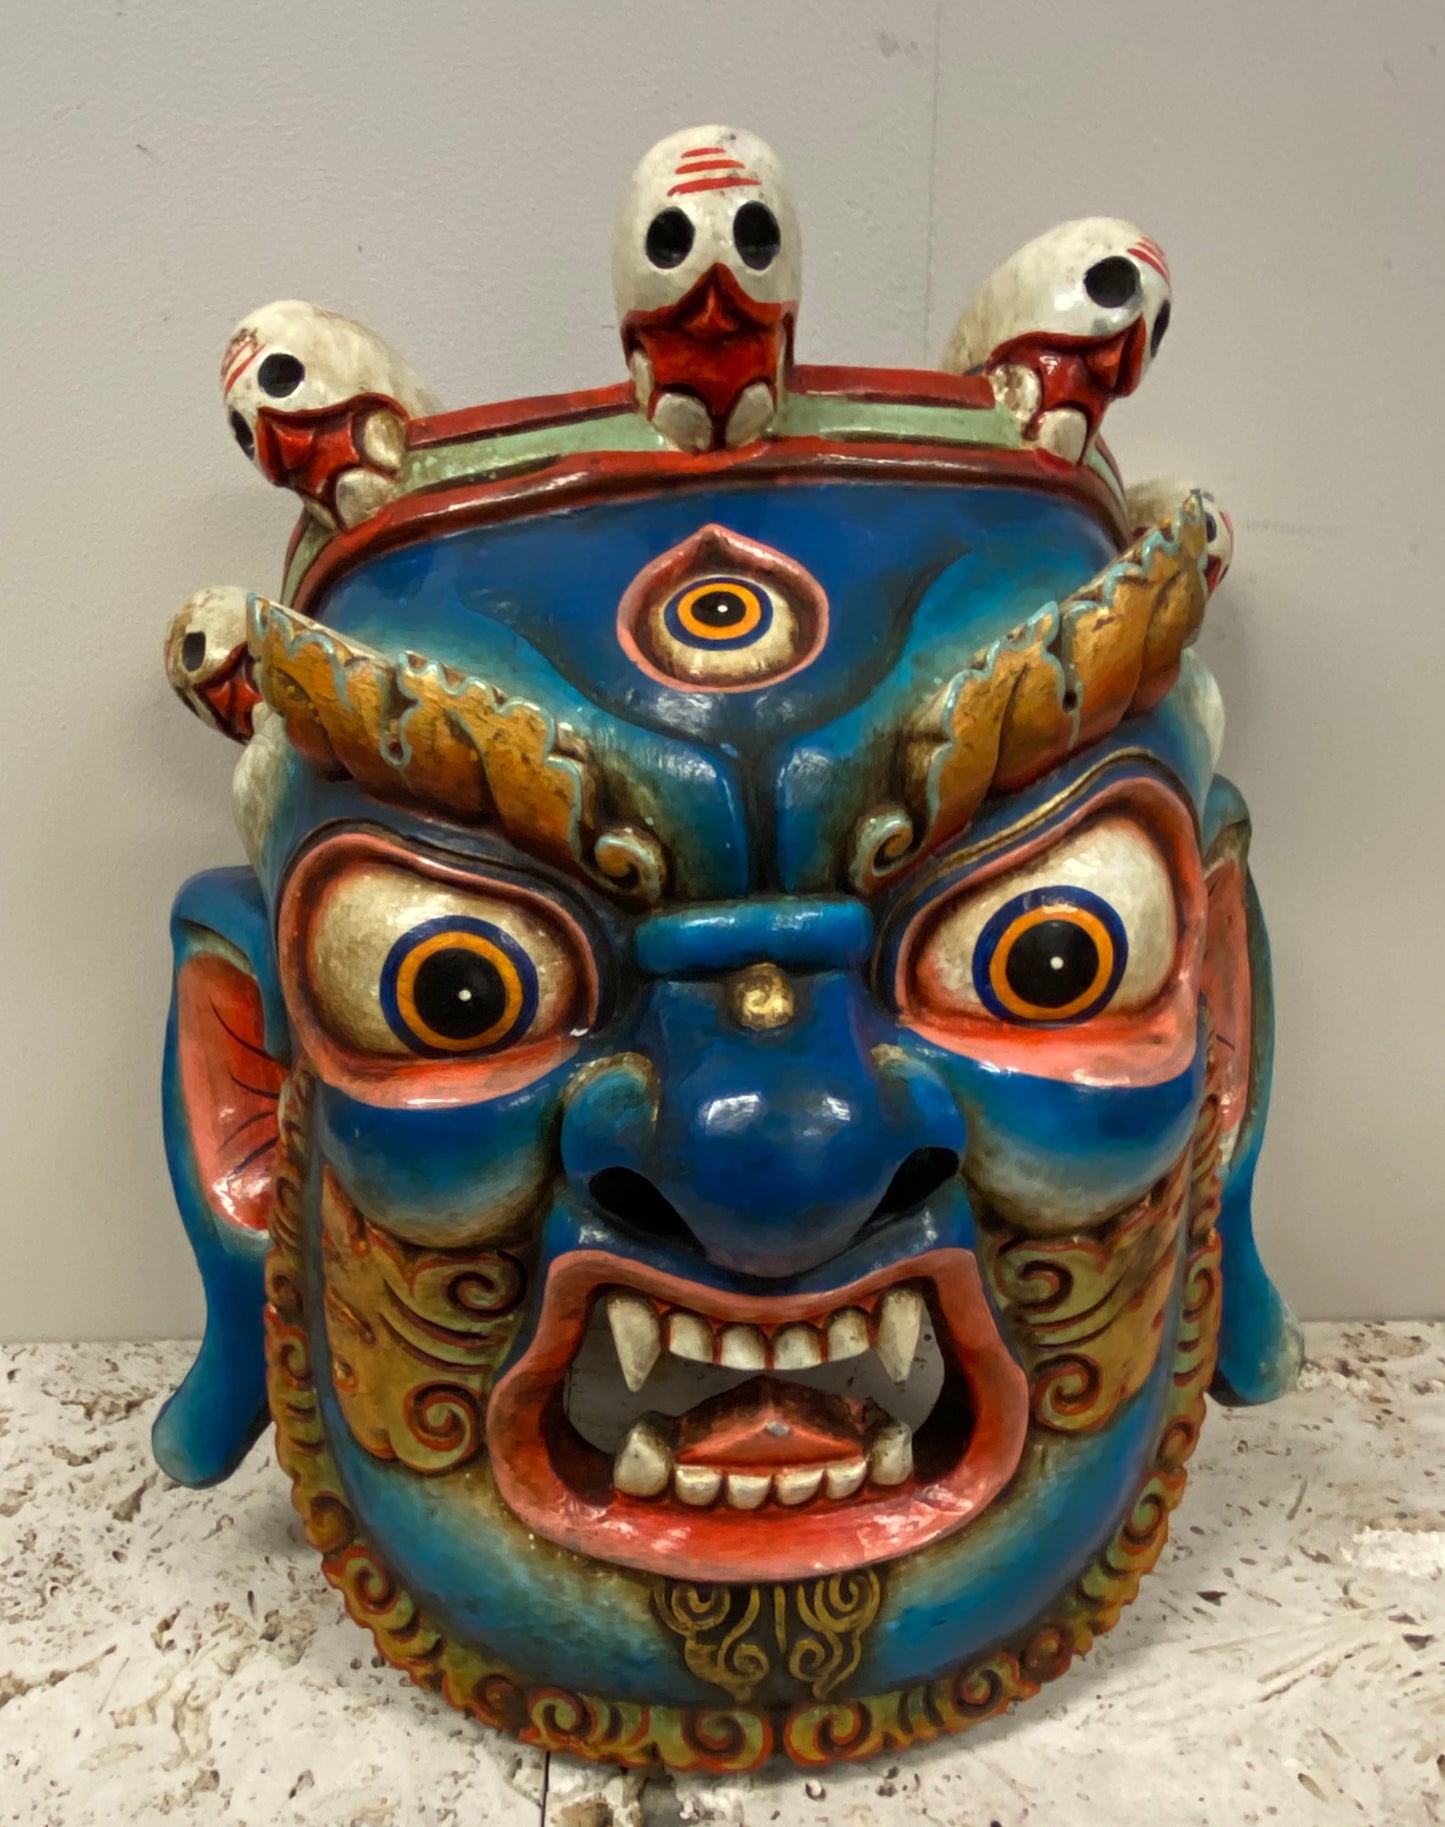 XL Hand Carved and Painted Bhairav Mask From Nepal Guardian of the Wheel of Life